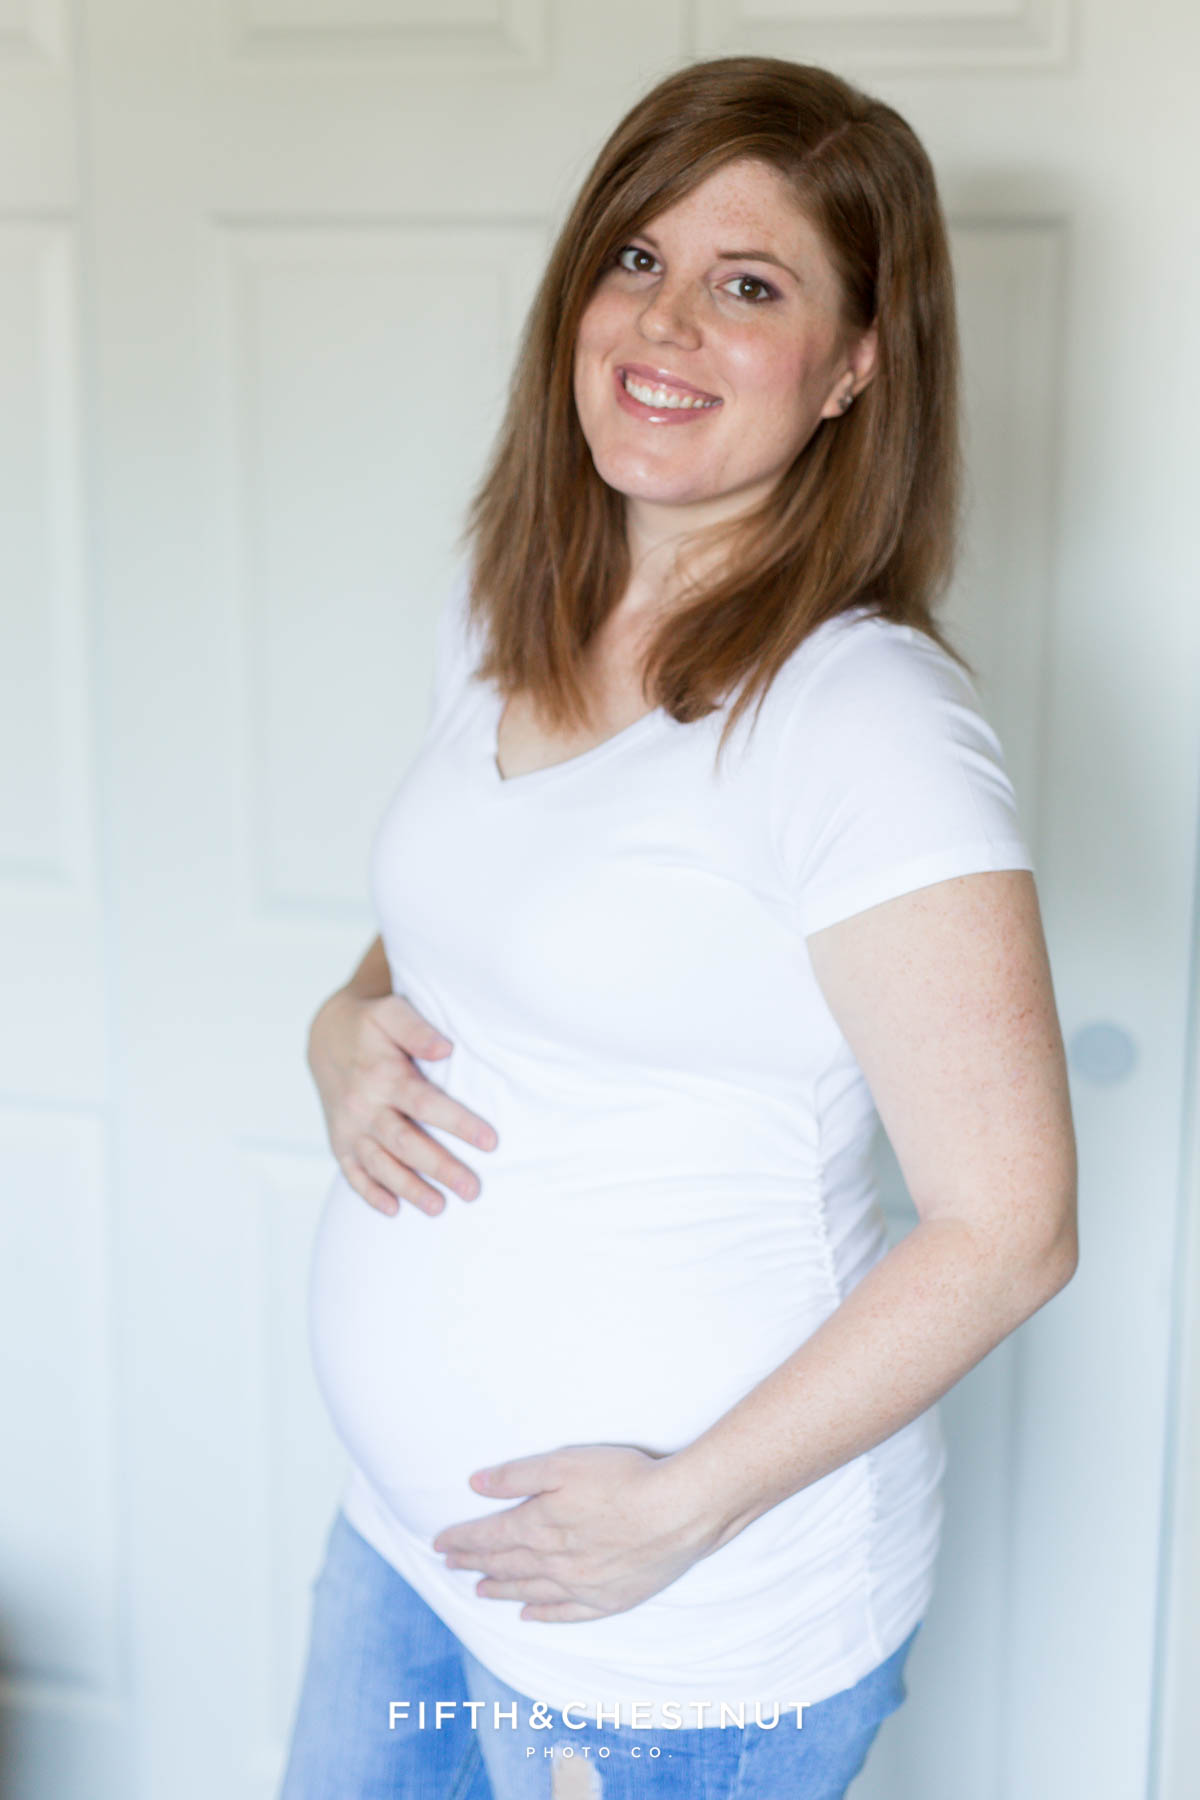 Reno family photographer at 14 weeks pregnant with twins wearing white